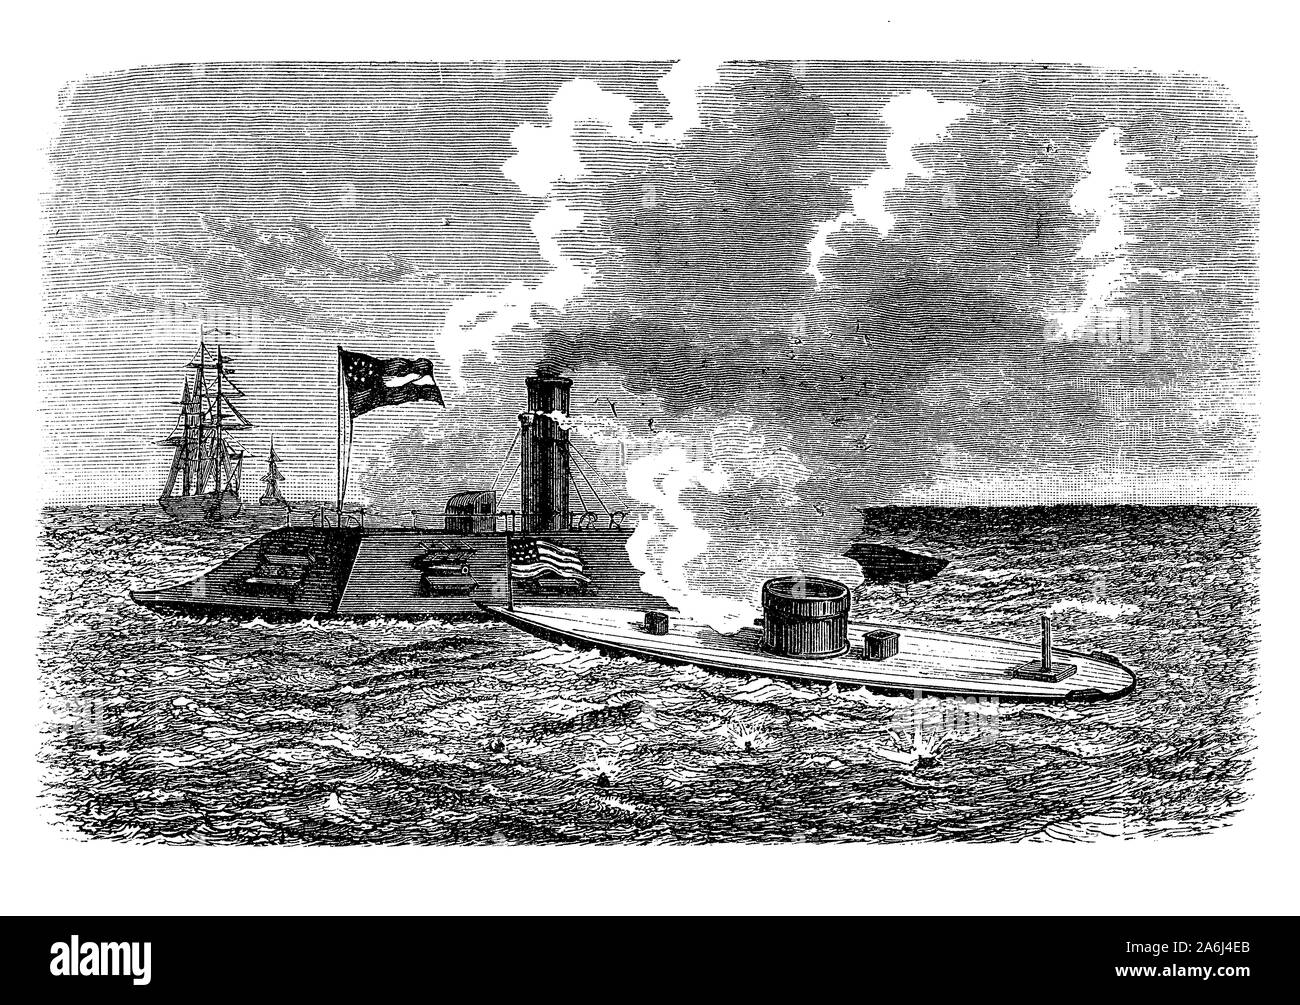 USS Merrimack steam frigate launched in 1855, captured in the American Civil War renamed CSS Virginia and used against the ironclad Monitor in the battle of Hampton Roads in 1862 Stock Photo